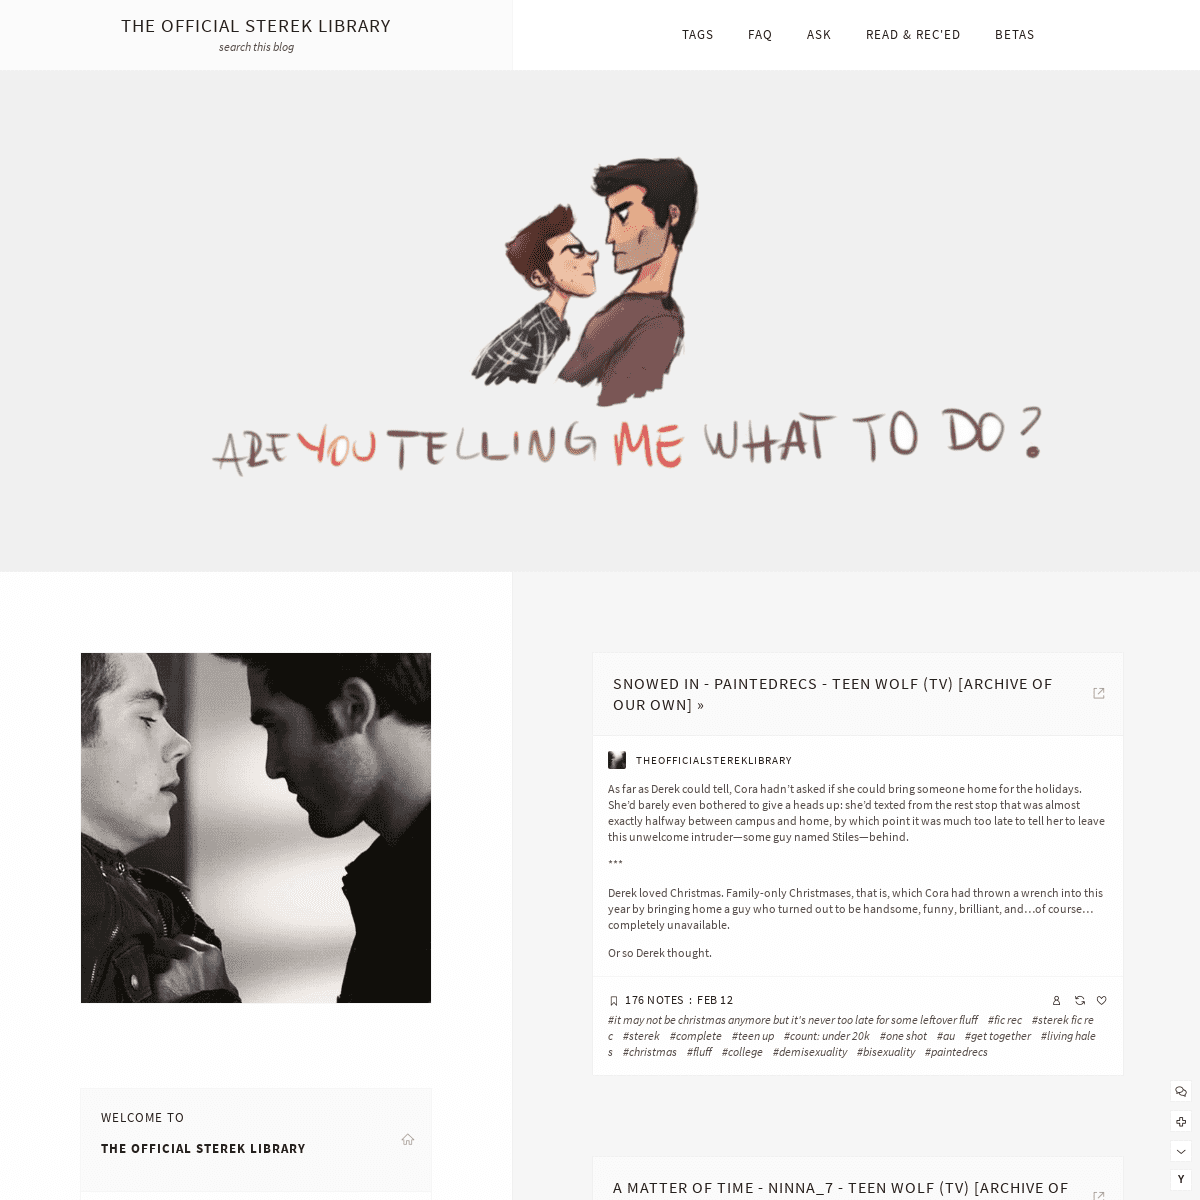 A complete backup of theofficialstereklibrary.tumblr.com